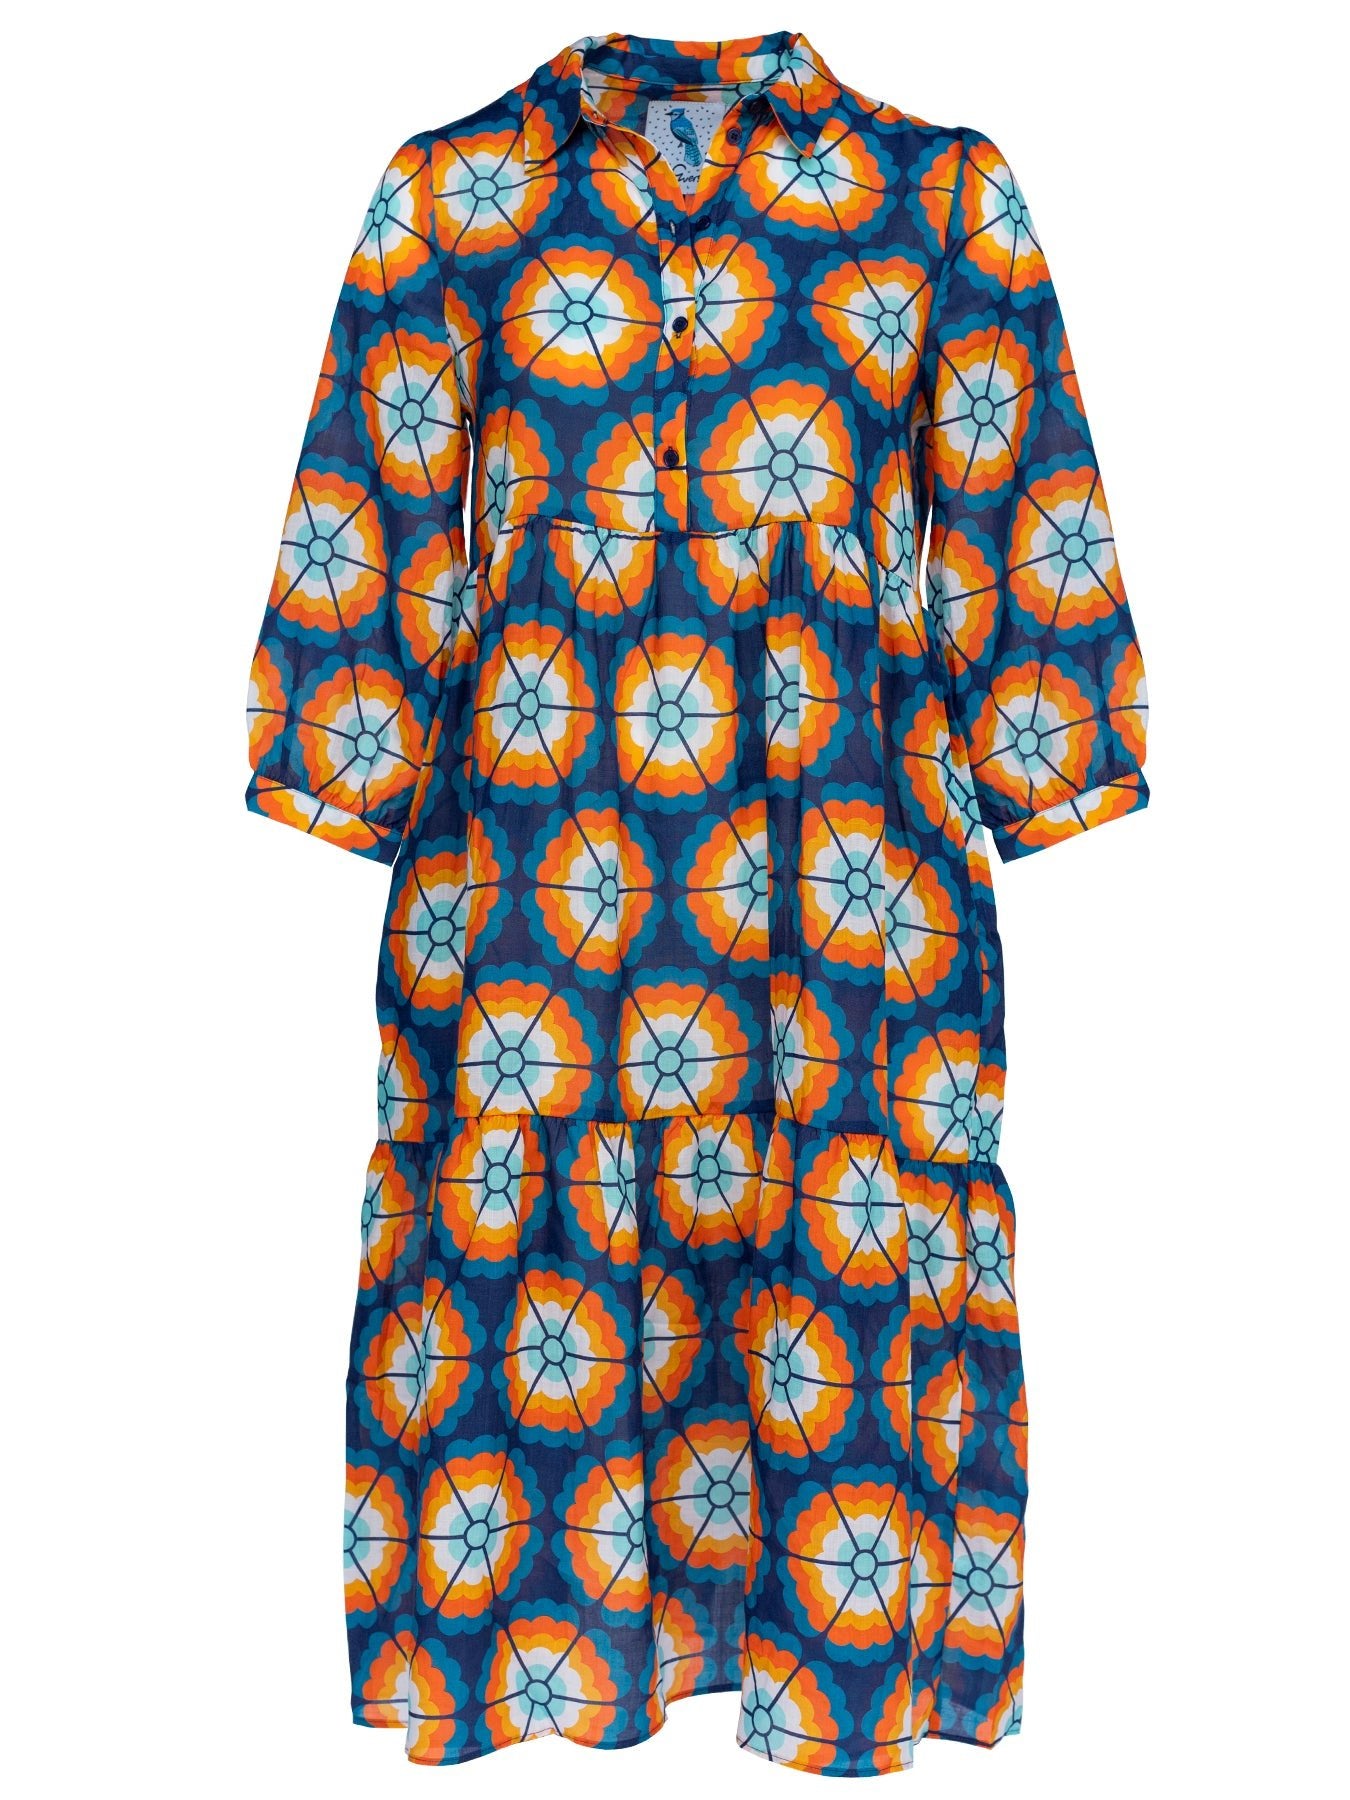 RUTHIE dress Morning Glory Navy - Lesley Evers-Dress-easter dress-morning glory